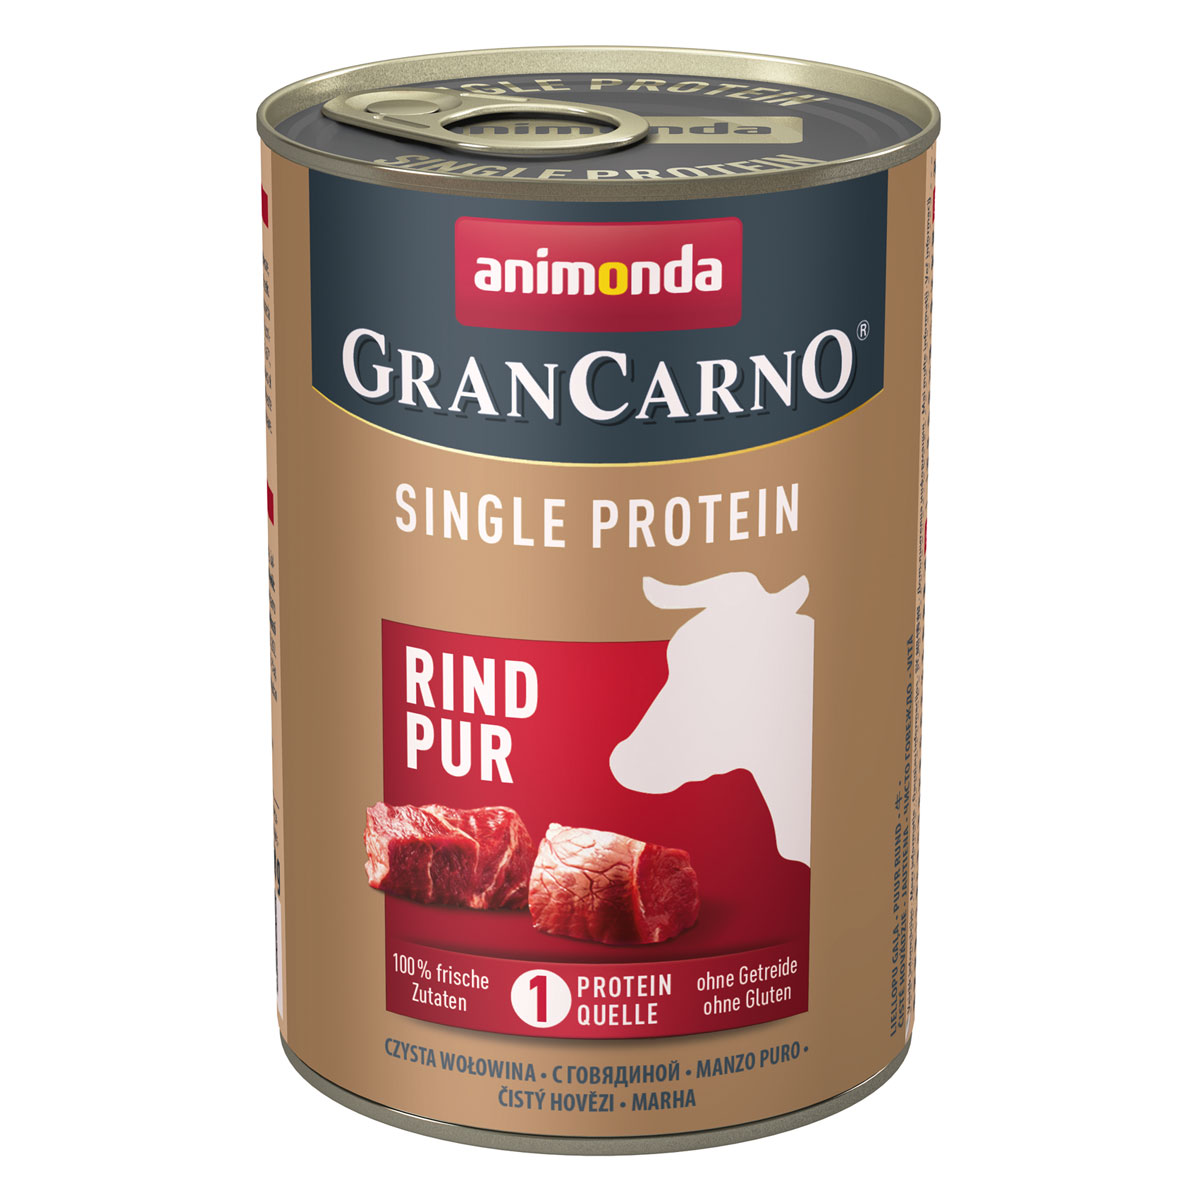 Adult Rind pur 400g